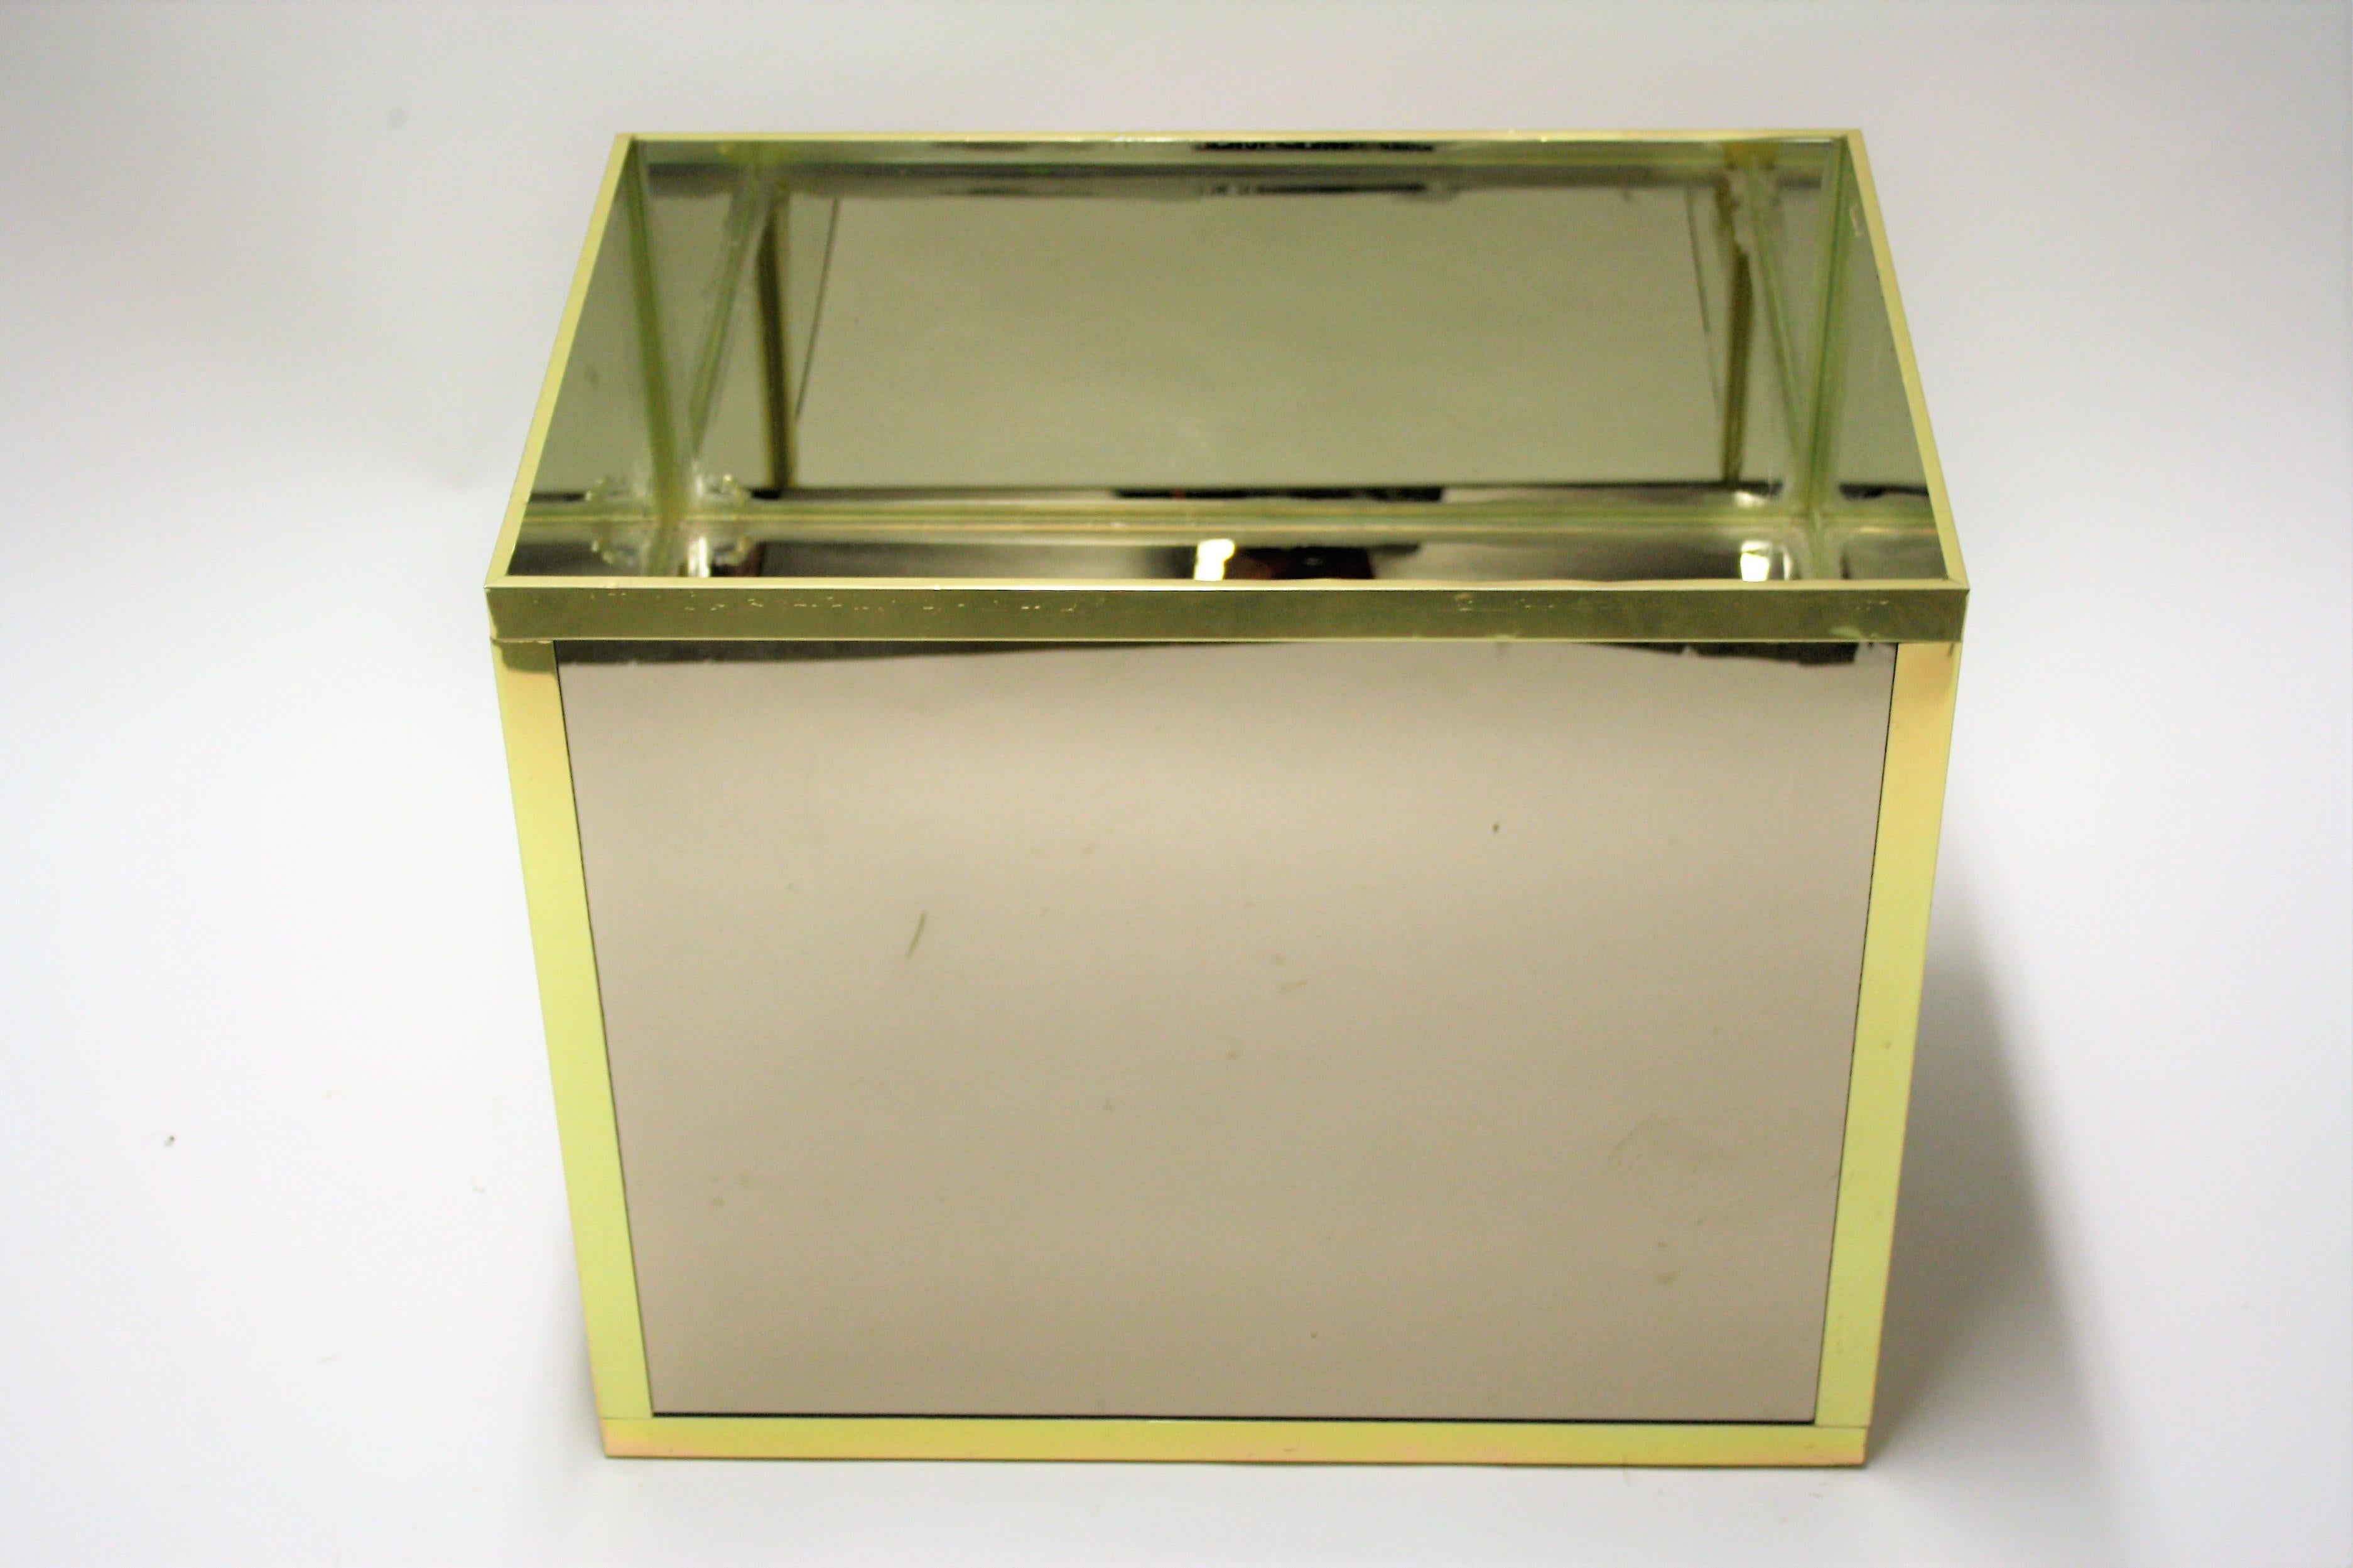 Hollywood Regency square planter made from brass and mirrored glass.

Good condition, for interior use only.

This was acquired from a bank building in Belgium, 

1970s, Belgium

Dimensions:
Height 51cm/20.07